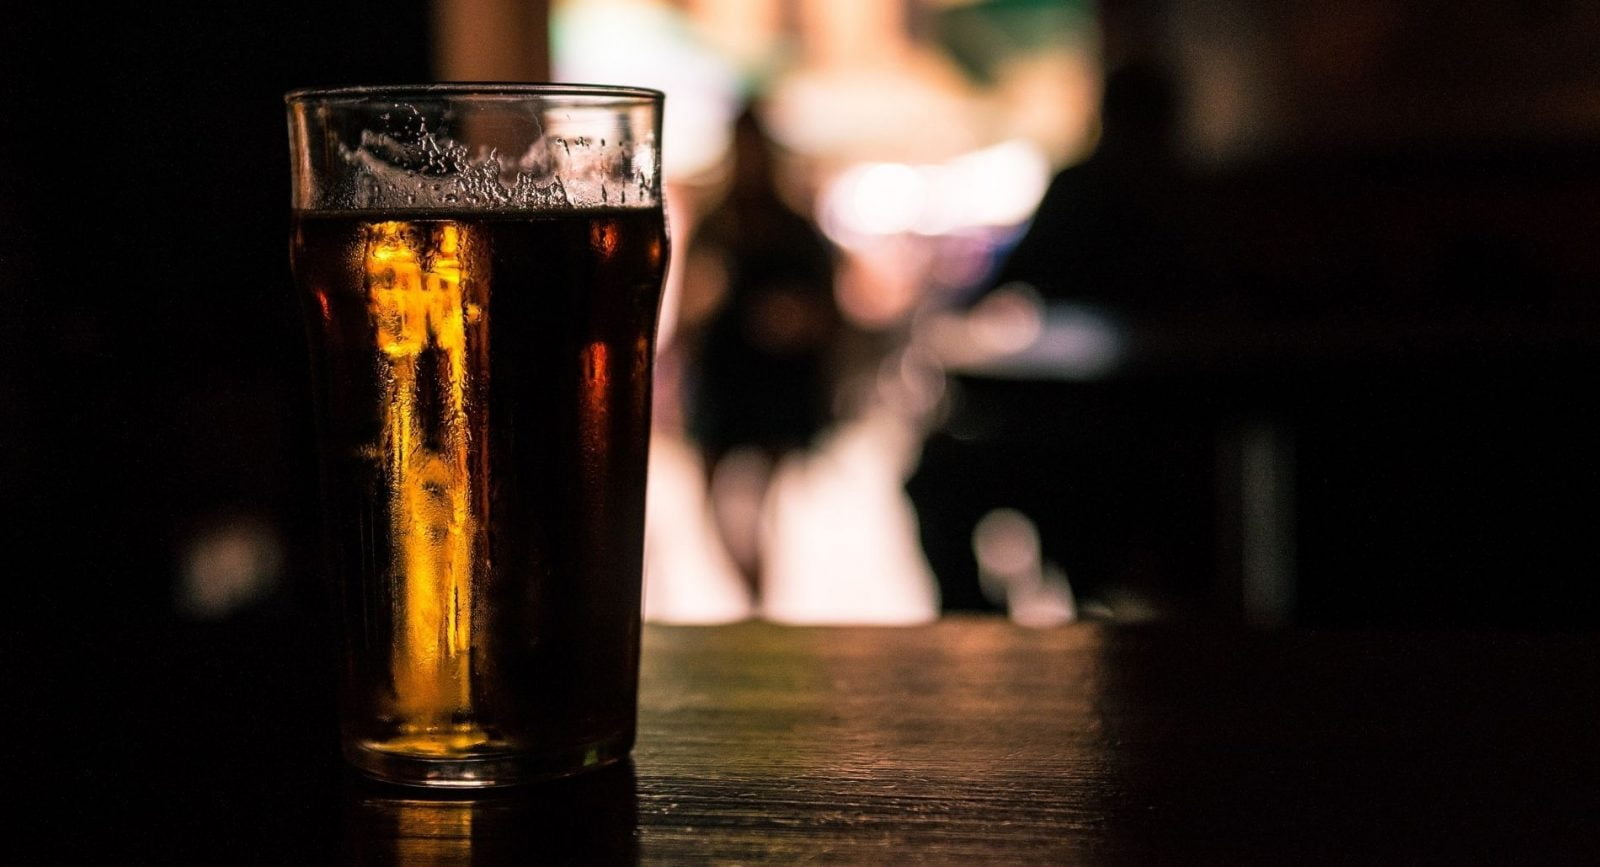 A pint of beer sitting on a wooden bench in a dark-lit room